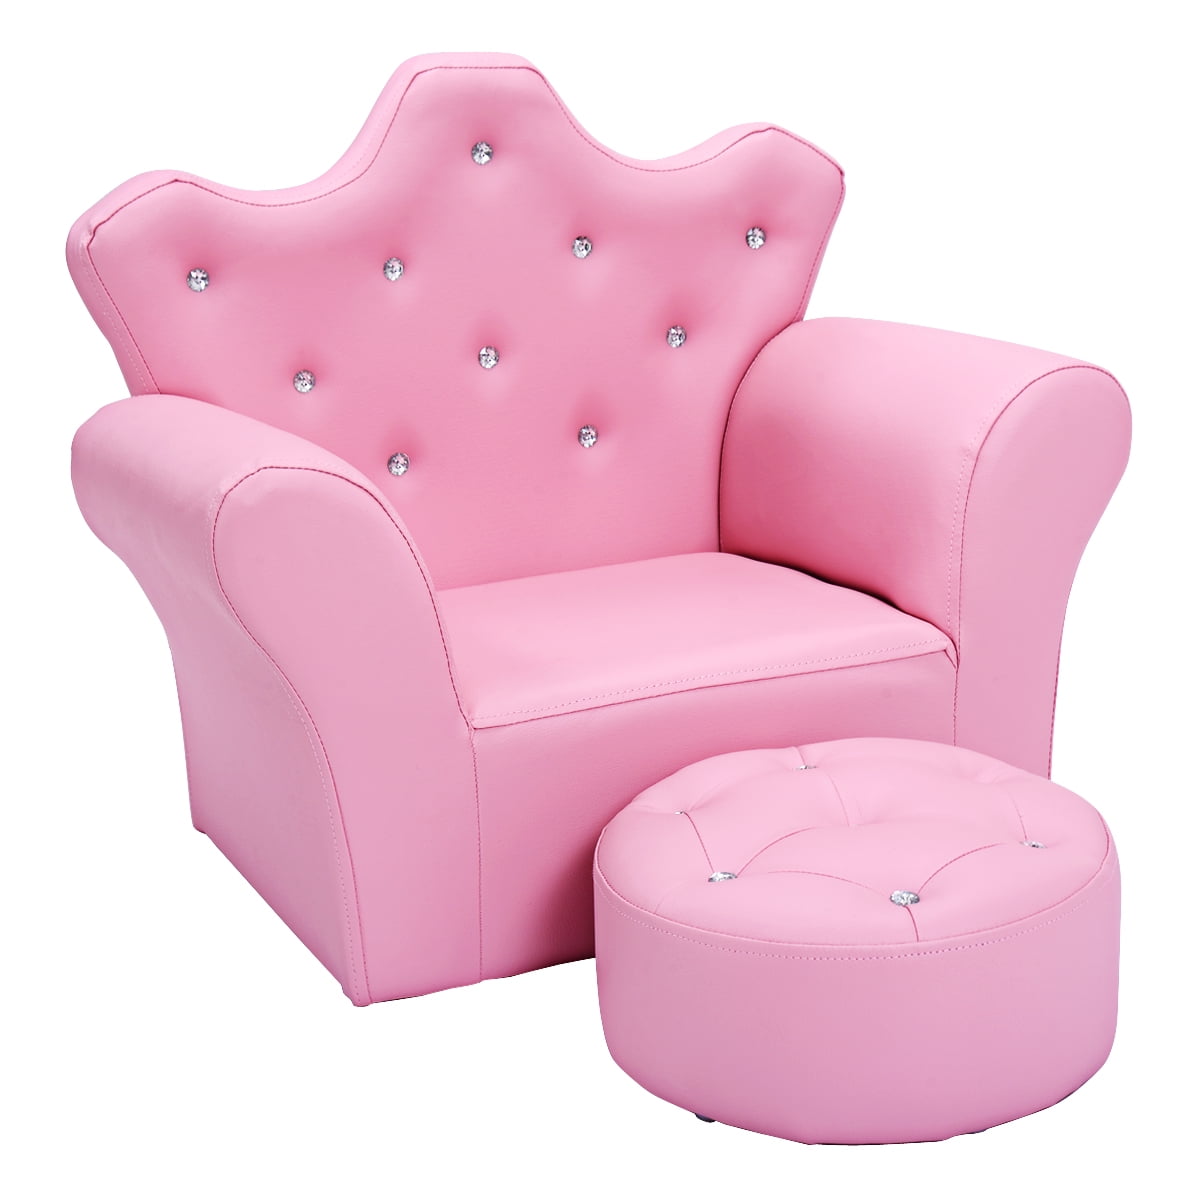 Kids Rocking Chair Toddler Girl Pink Furniture Play Room Lounge Home Gift New 